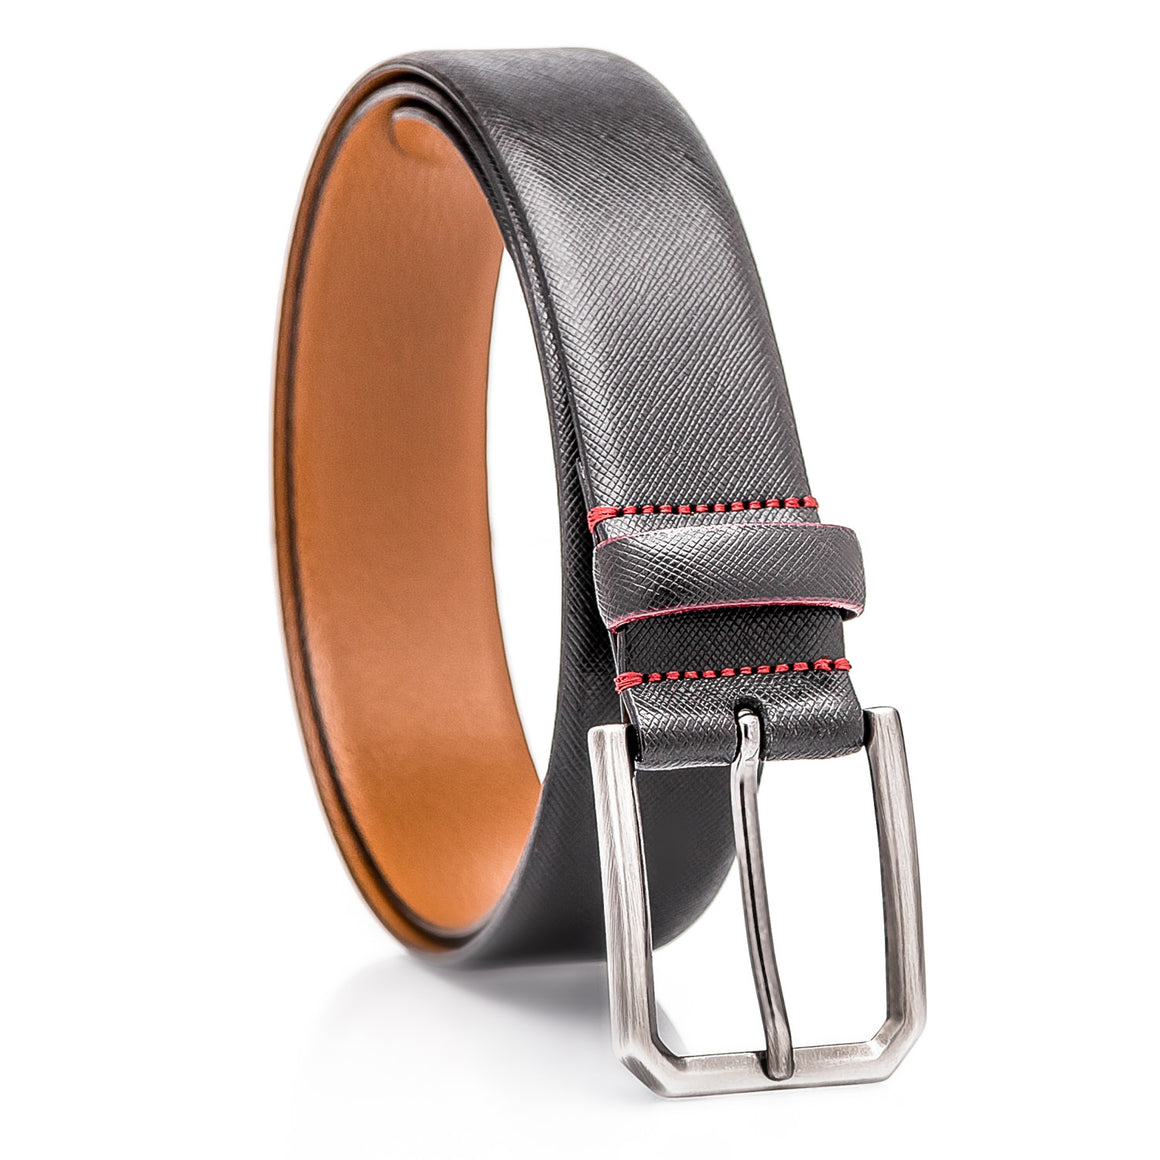 MEN’S LEATHER DRESS BELTS - MADE IN ITALY